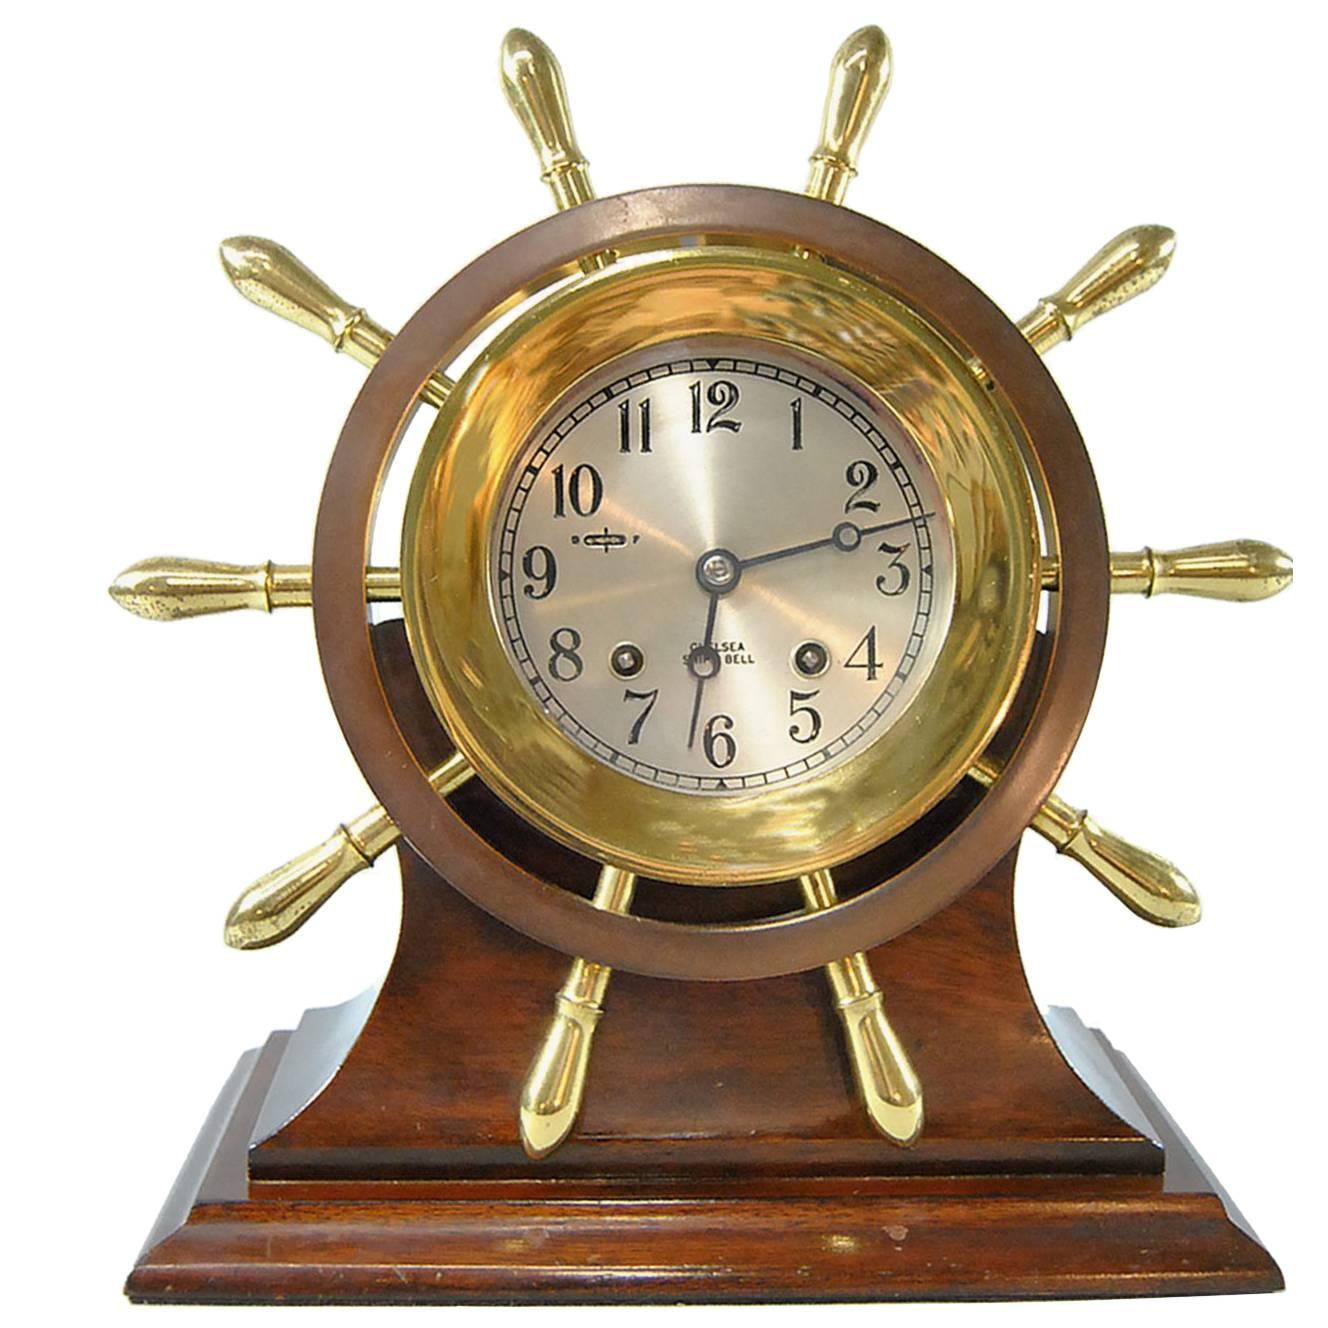 Chelsea Ship's Bell Yacht Wheel, Pilot Model Clock with Stand